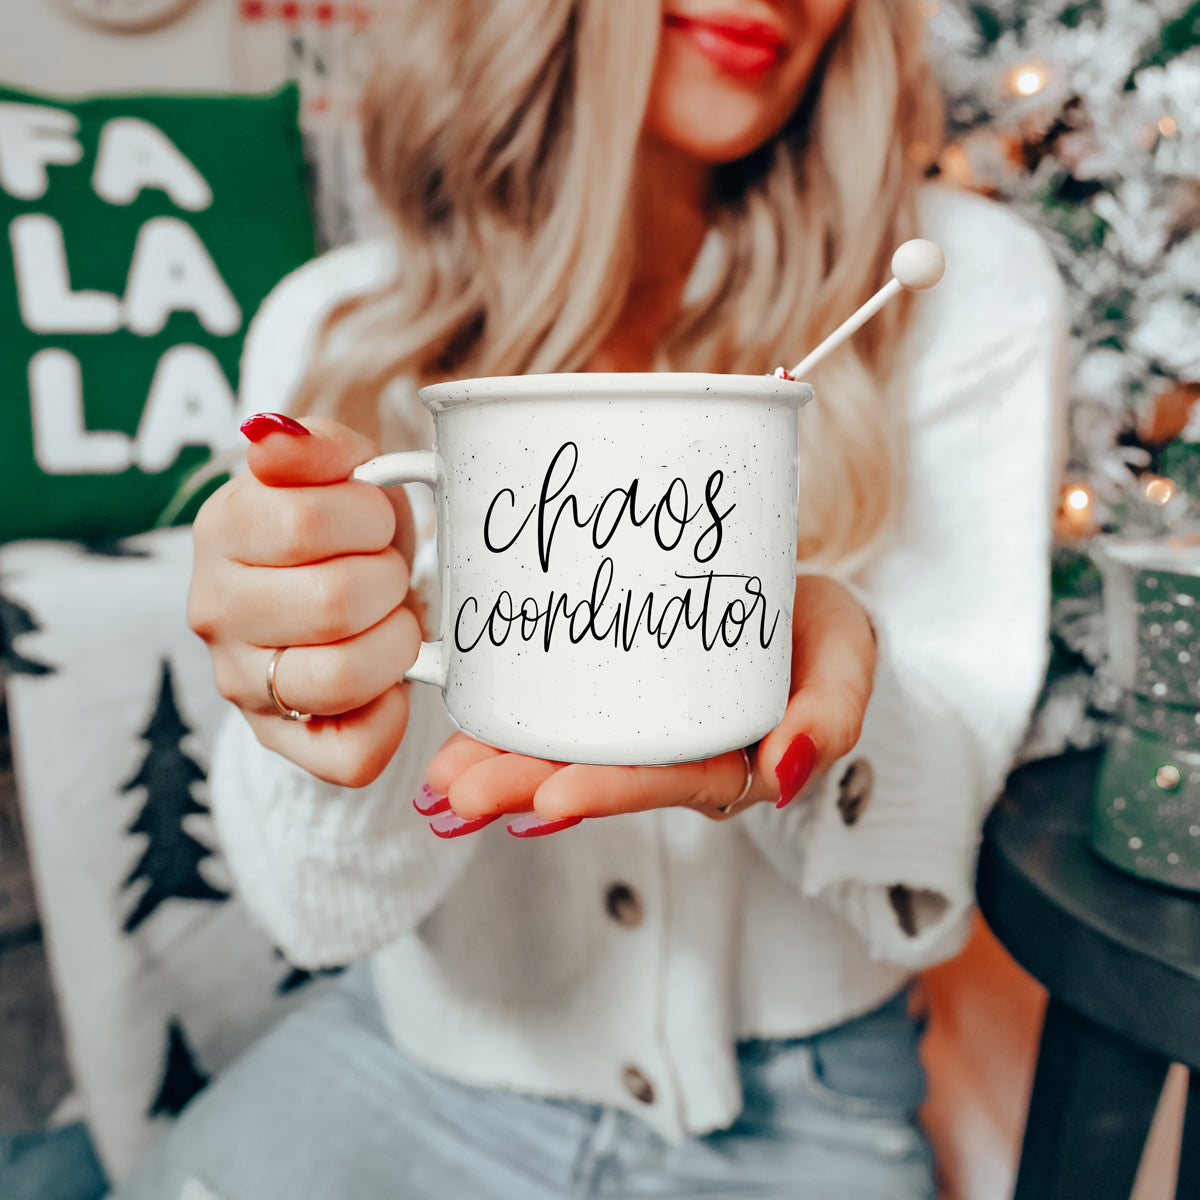 Best Coffee mugs for parent gifts, teacher gifts, boss woman gifts